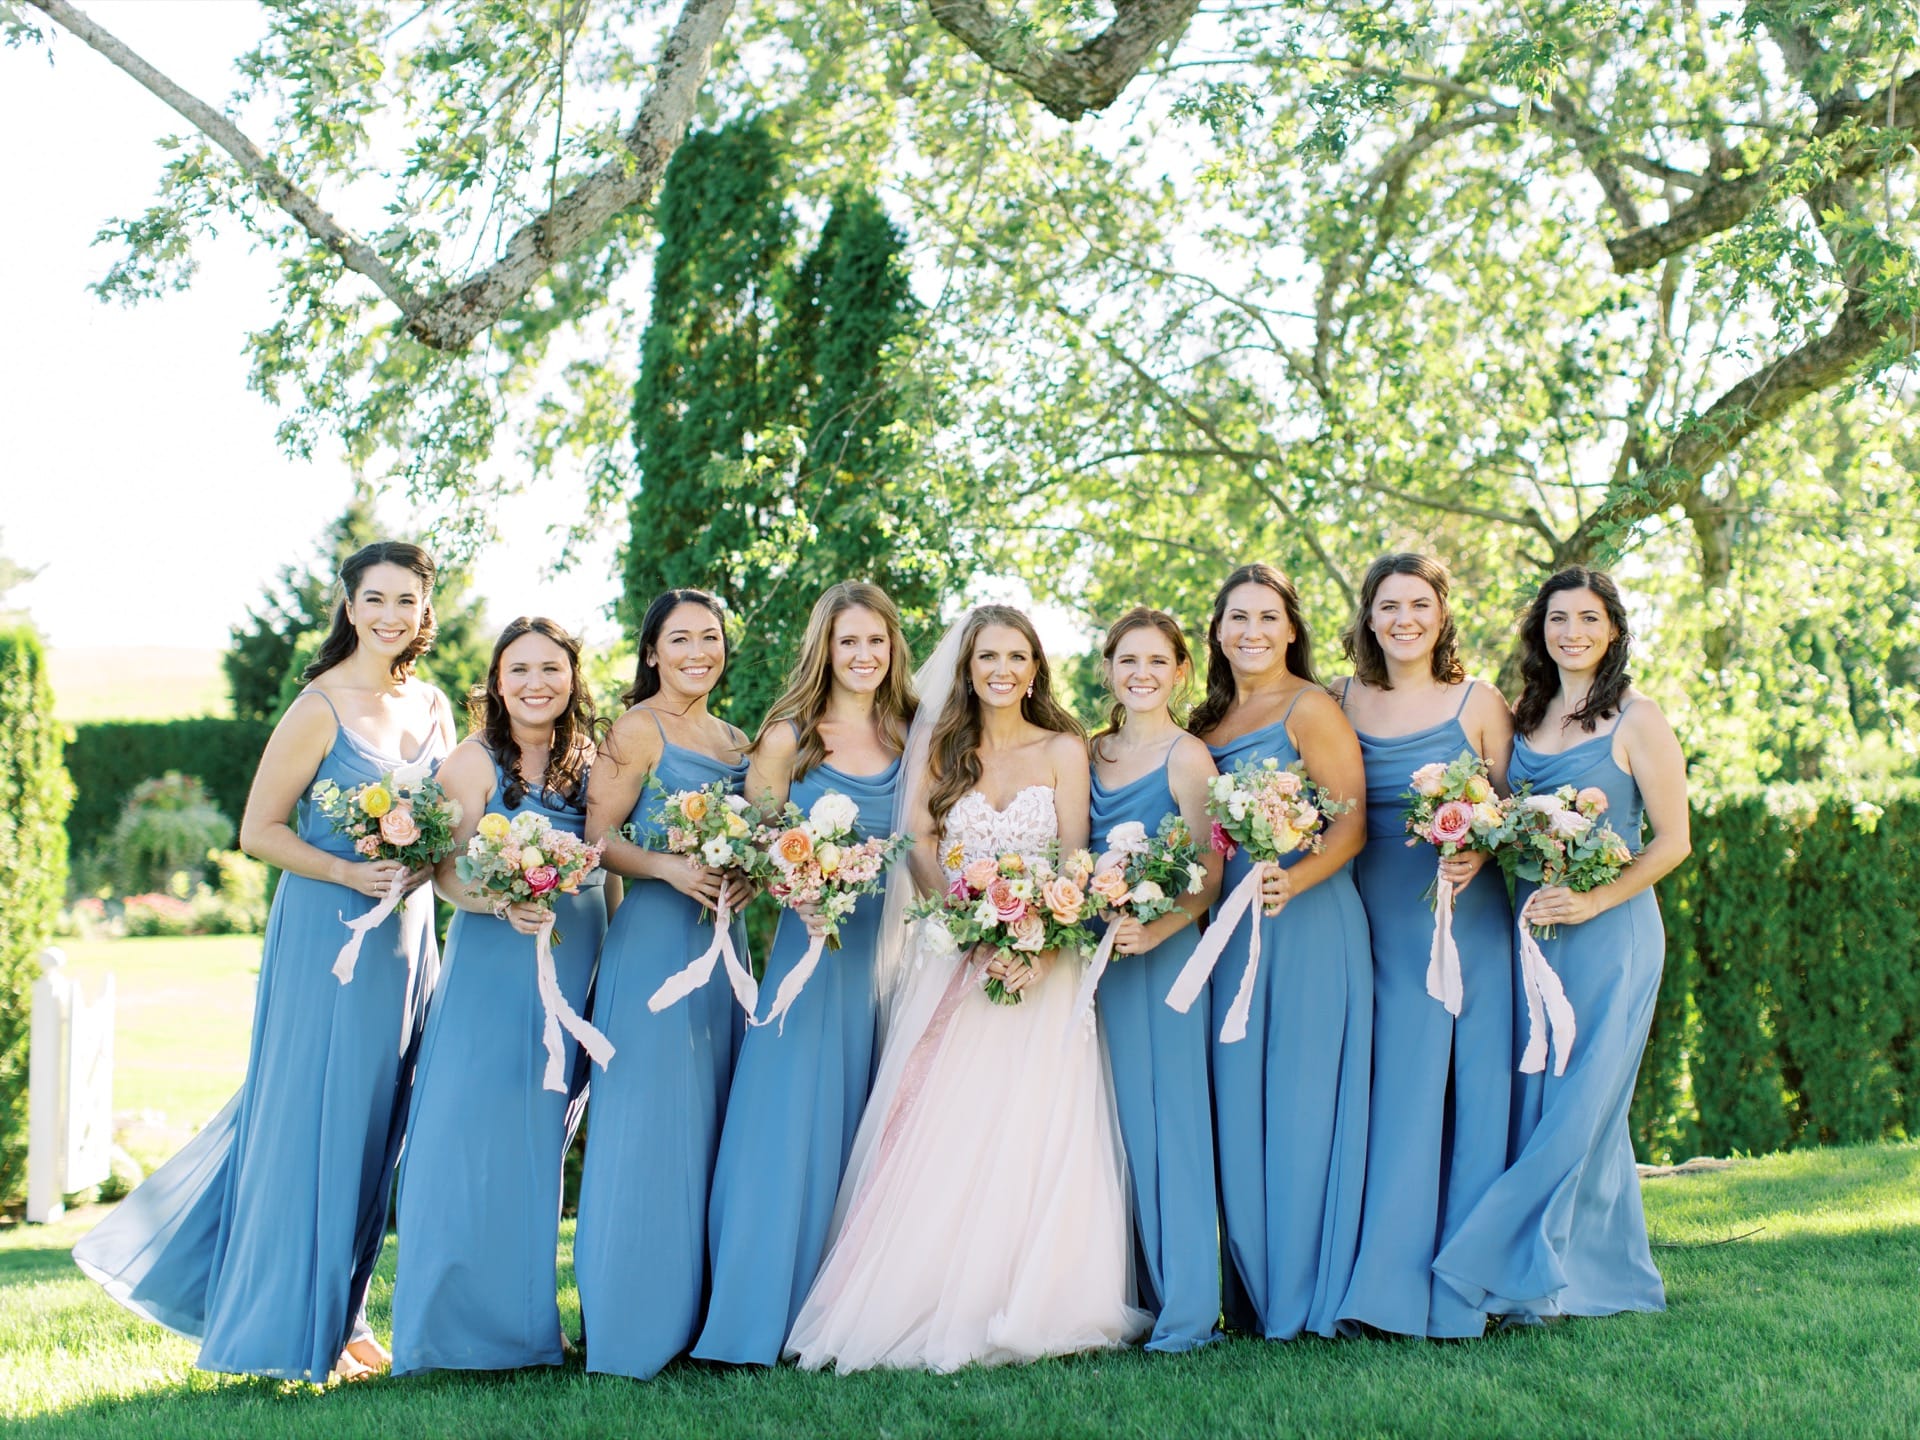 Bride in white surrounded by bridesmaids in blue dresses, standing in front of green hedges and trees